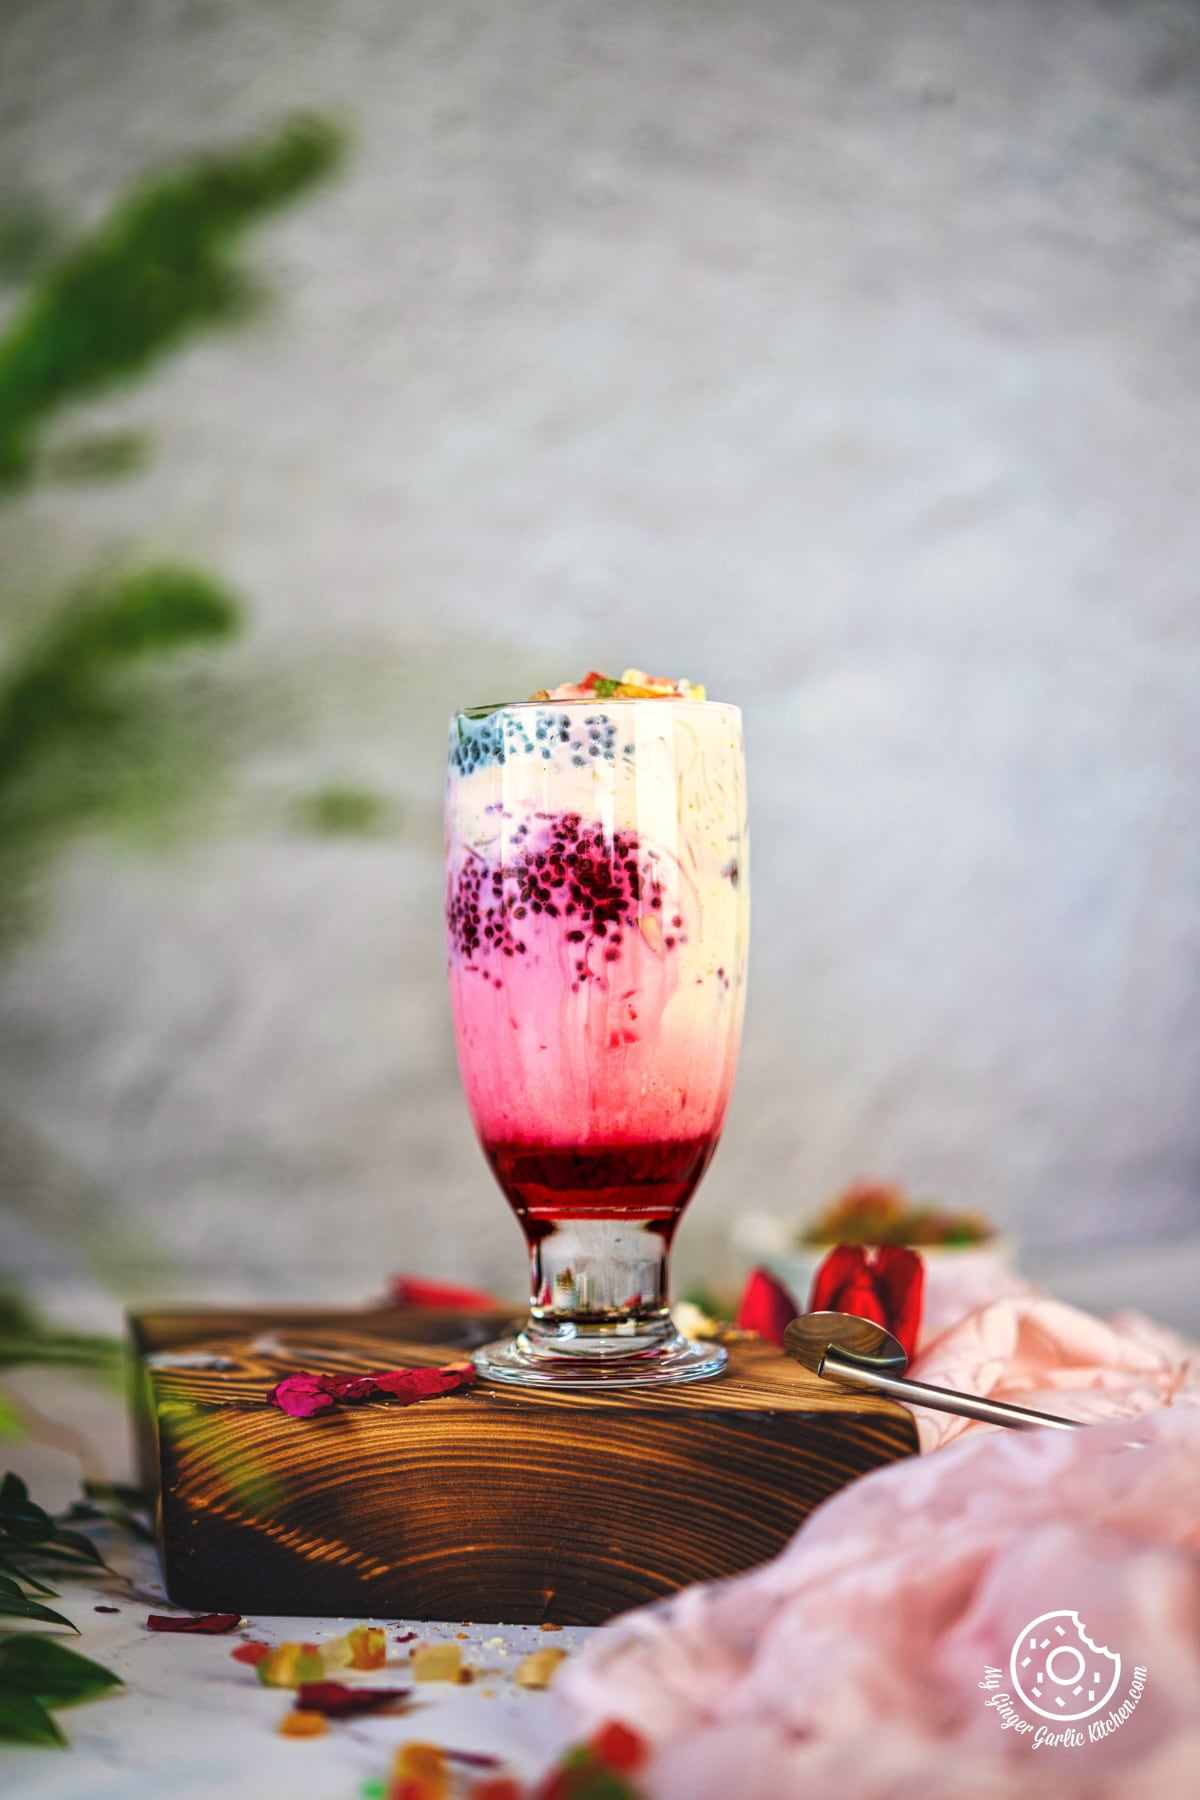 photo of a glass of falooda with ice cream with nuts and rose syrup on top